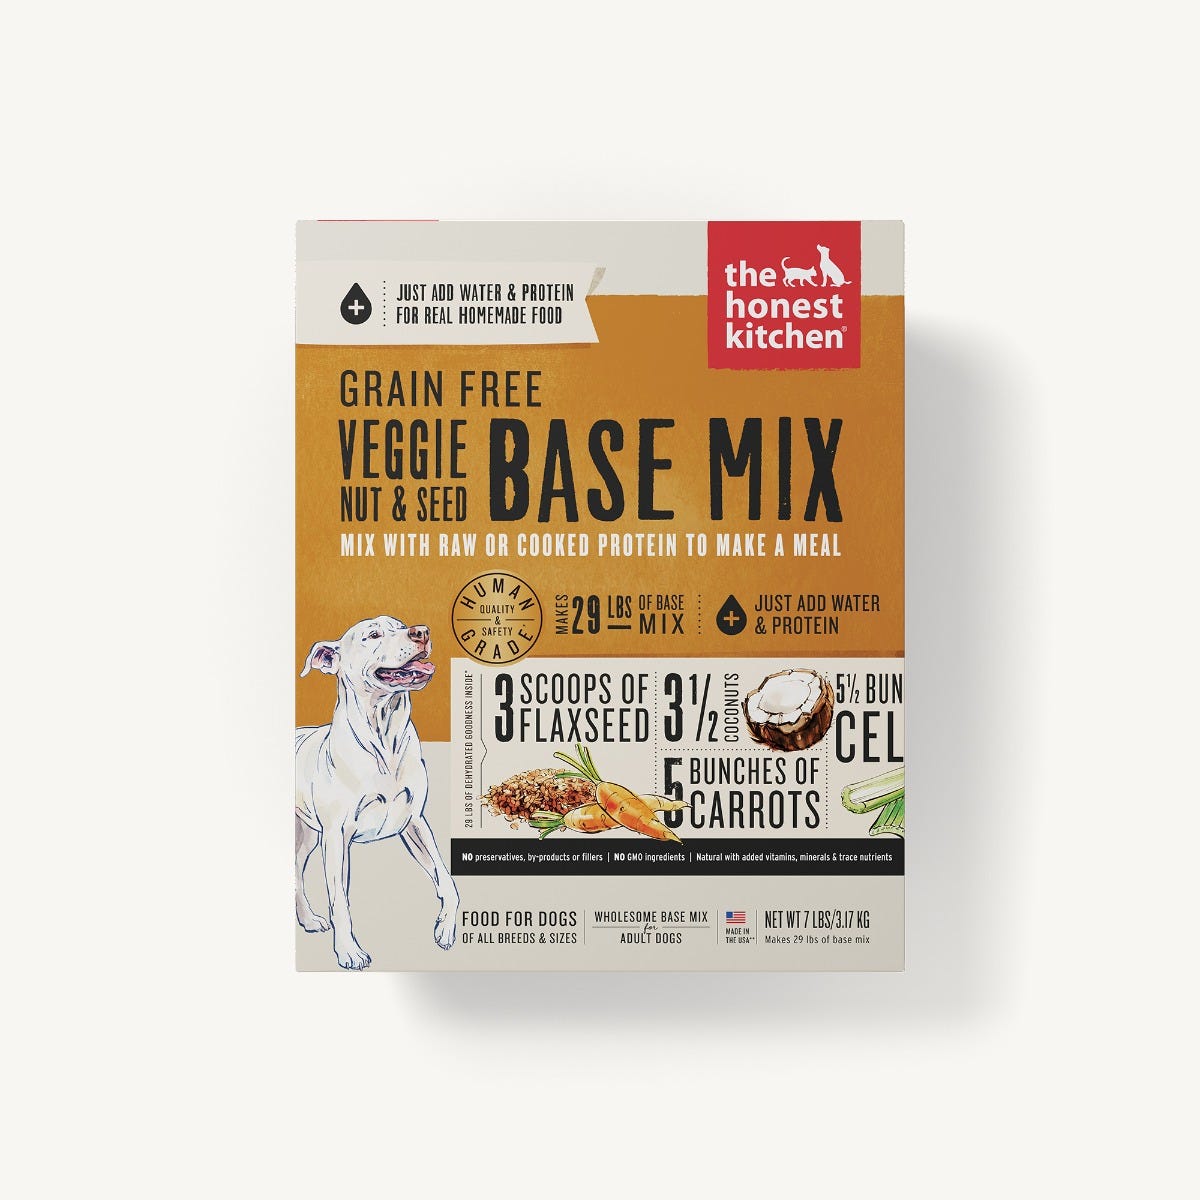 The Honest Kitchen - Dehydrated - Grain Free Veggie, Nut & Seed Based Mix (Dog Food)